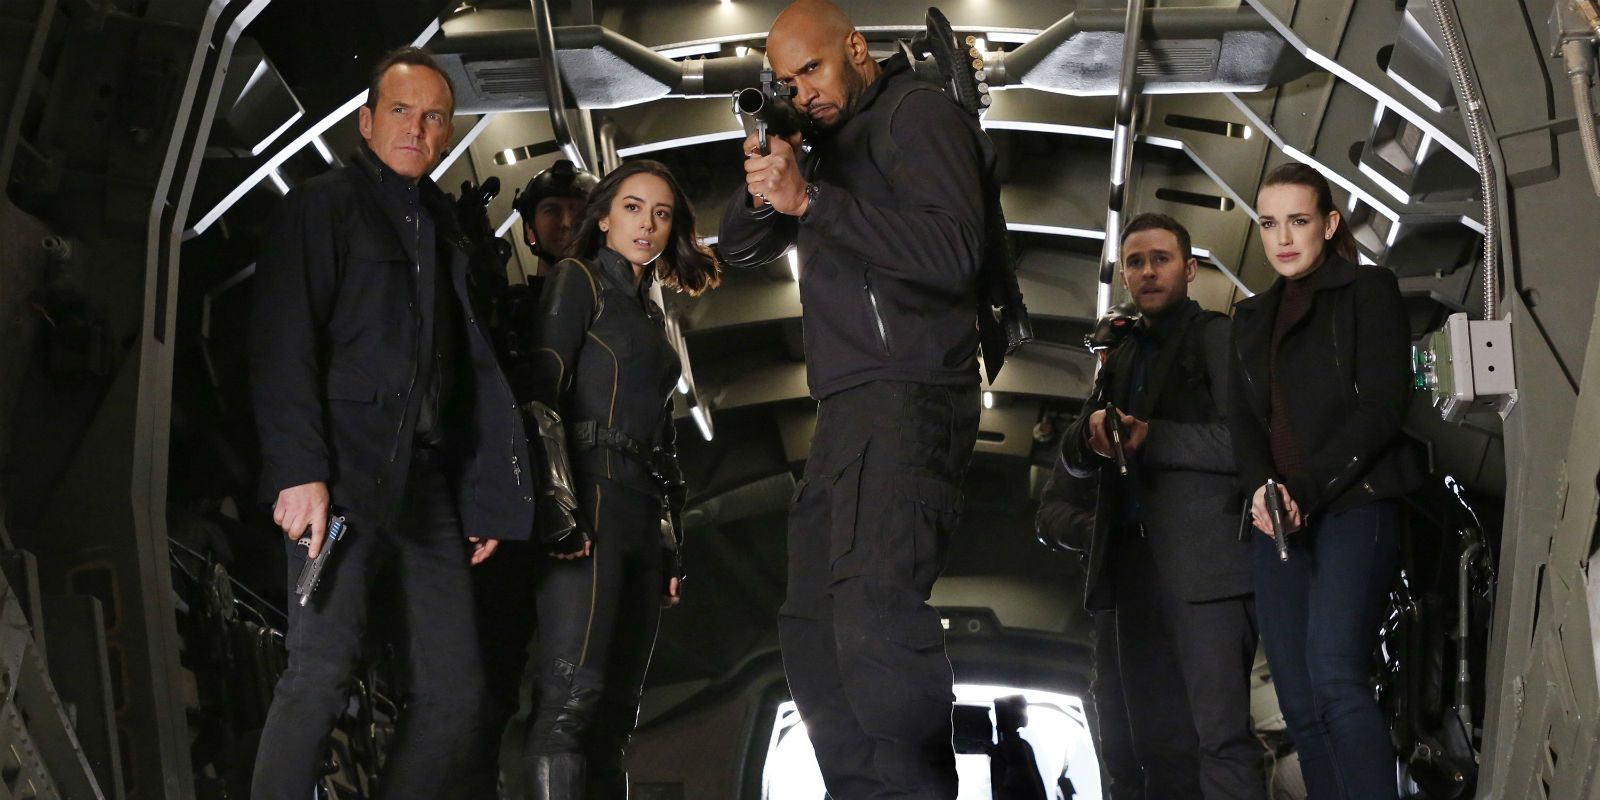 What to Expect When Agents of SHIELD Season 4 Returns